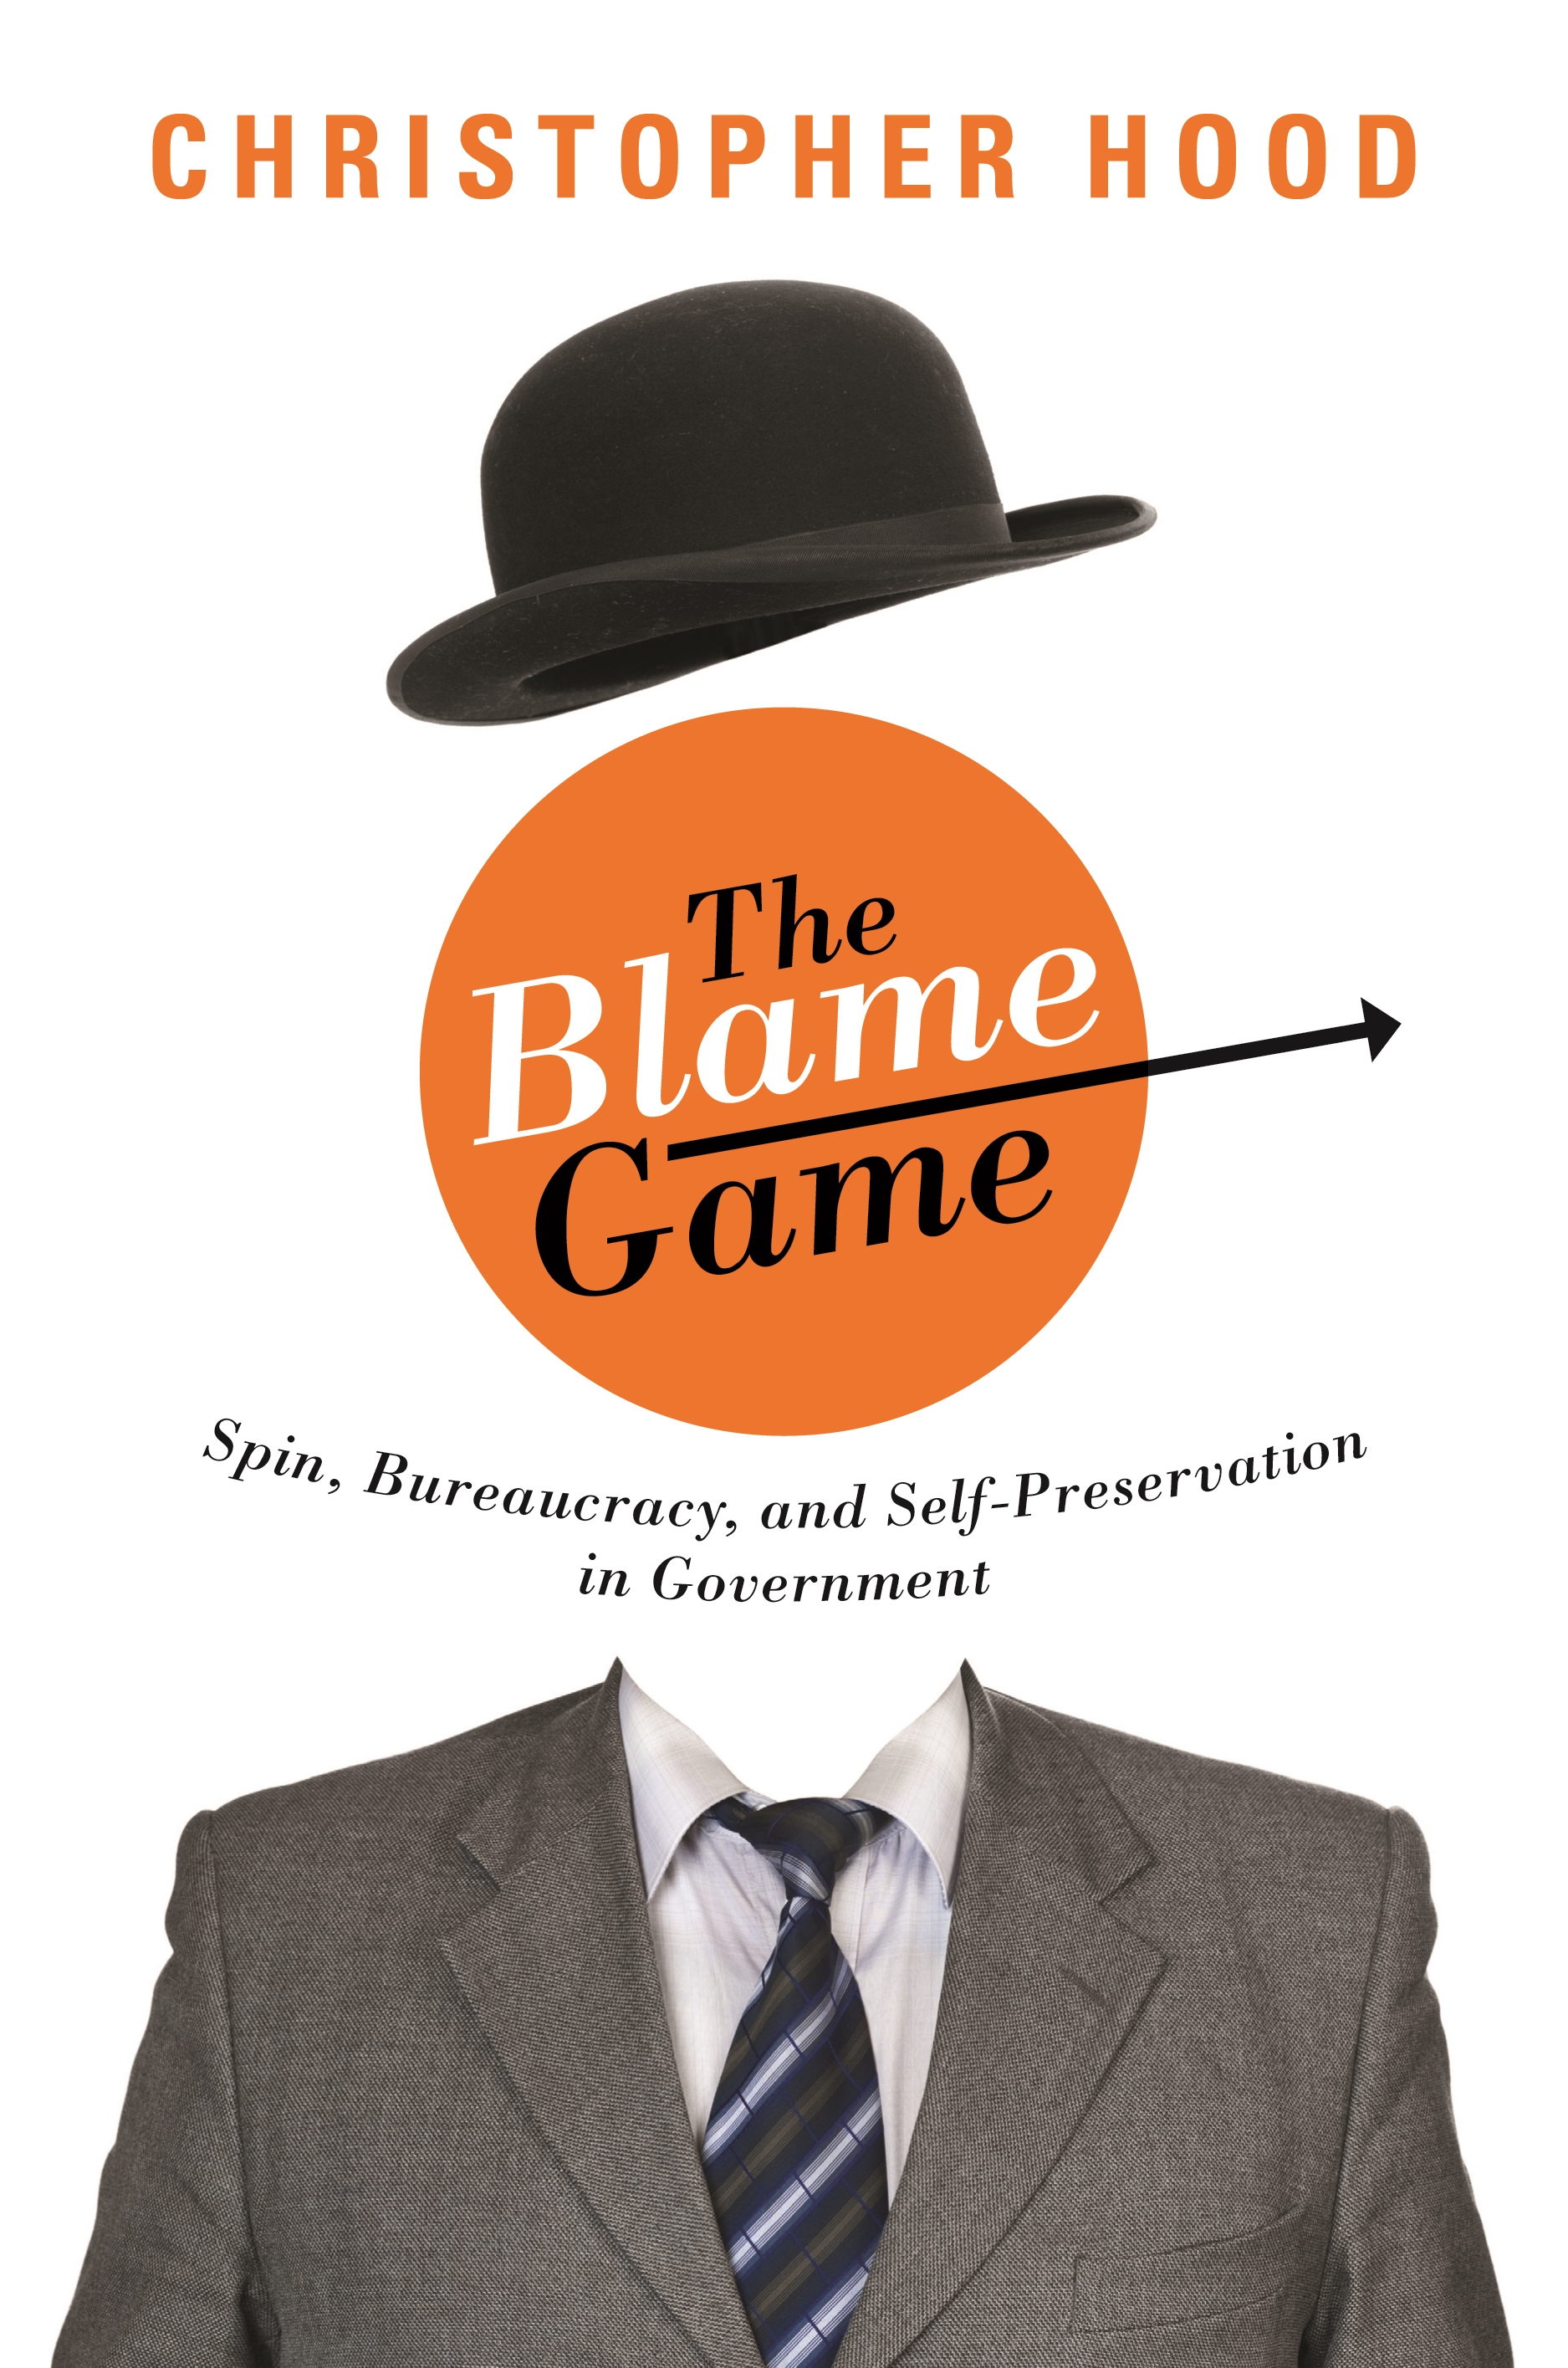  The Blame Game: An addictive and emotional thriller